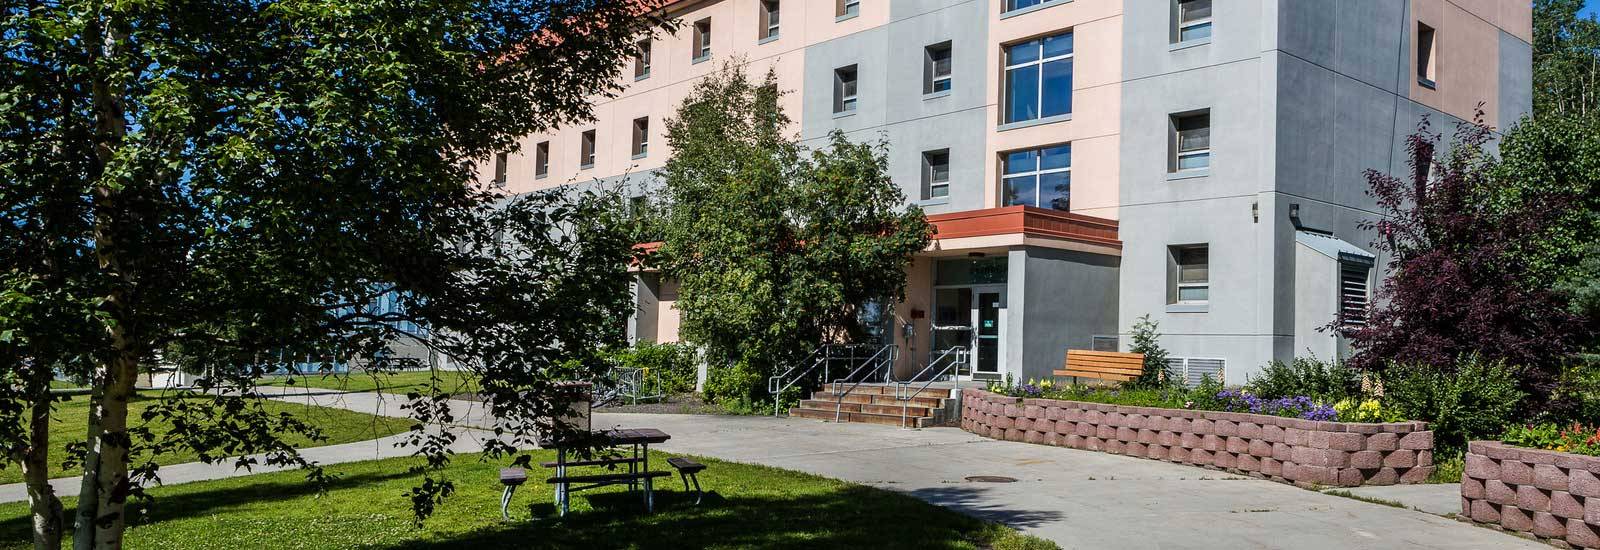 Lathrop hall houses UAF Financial Services